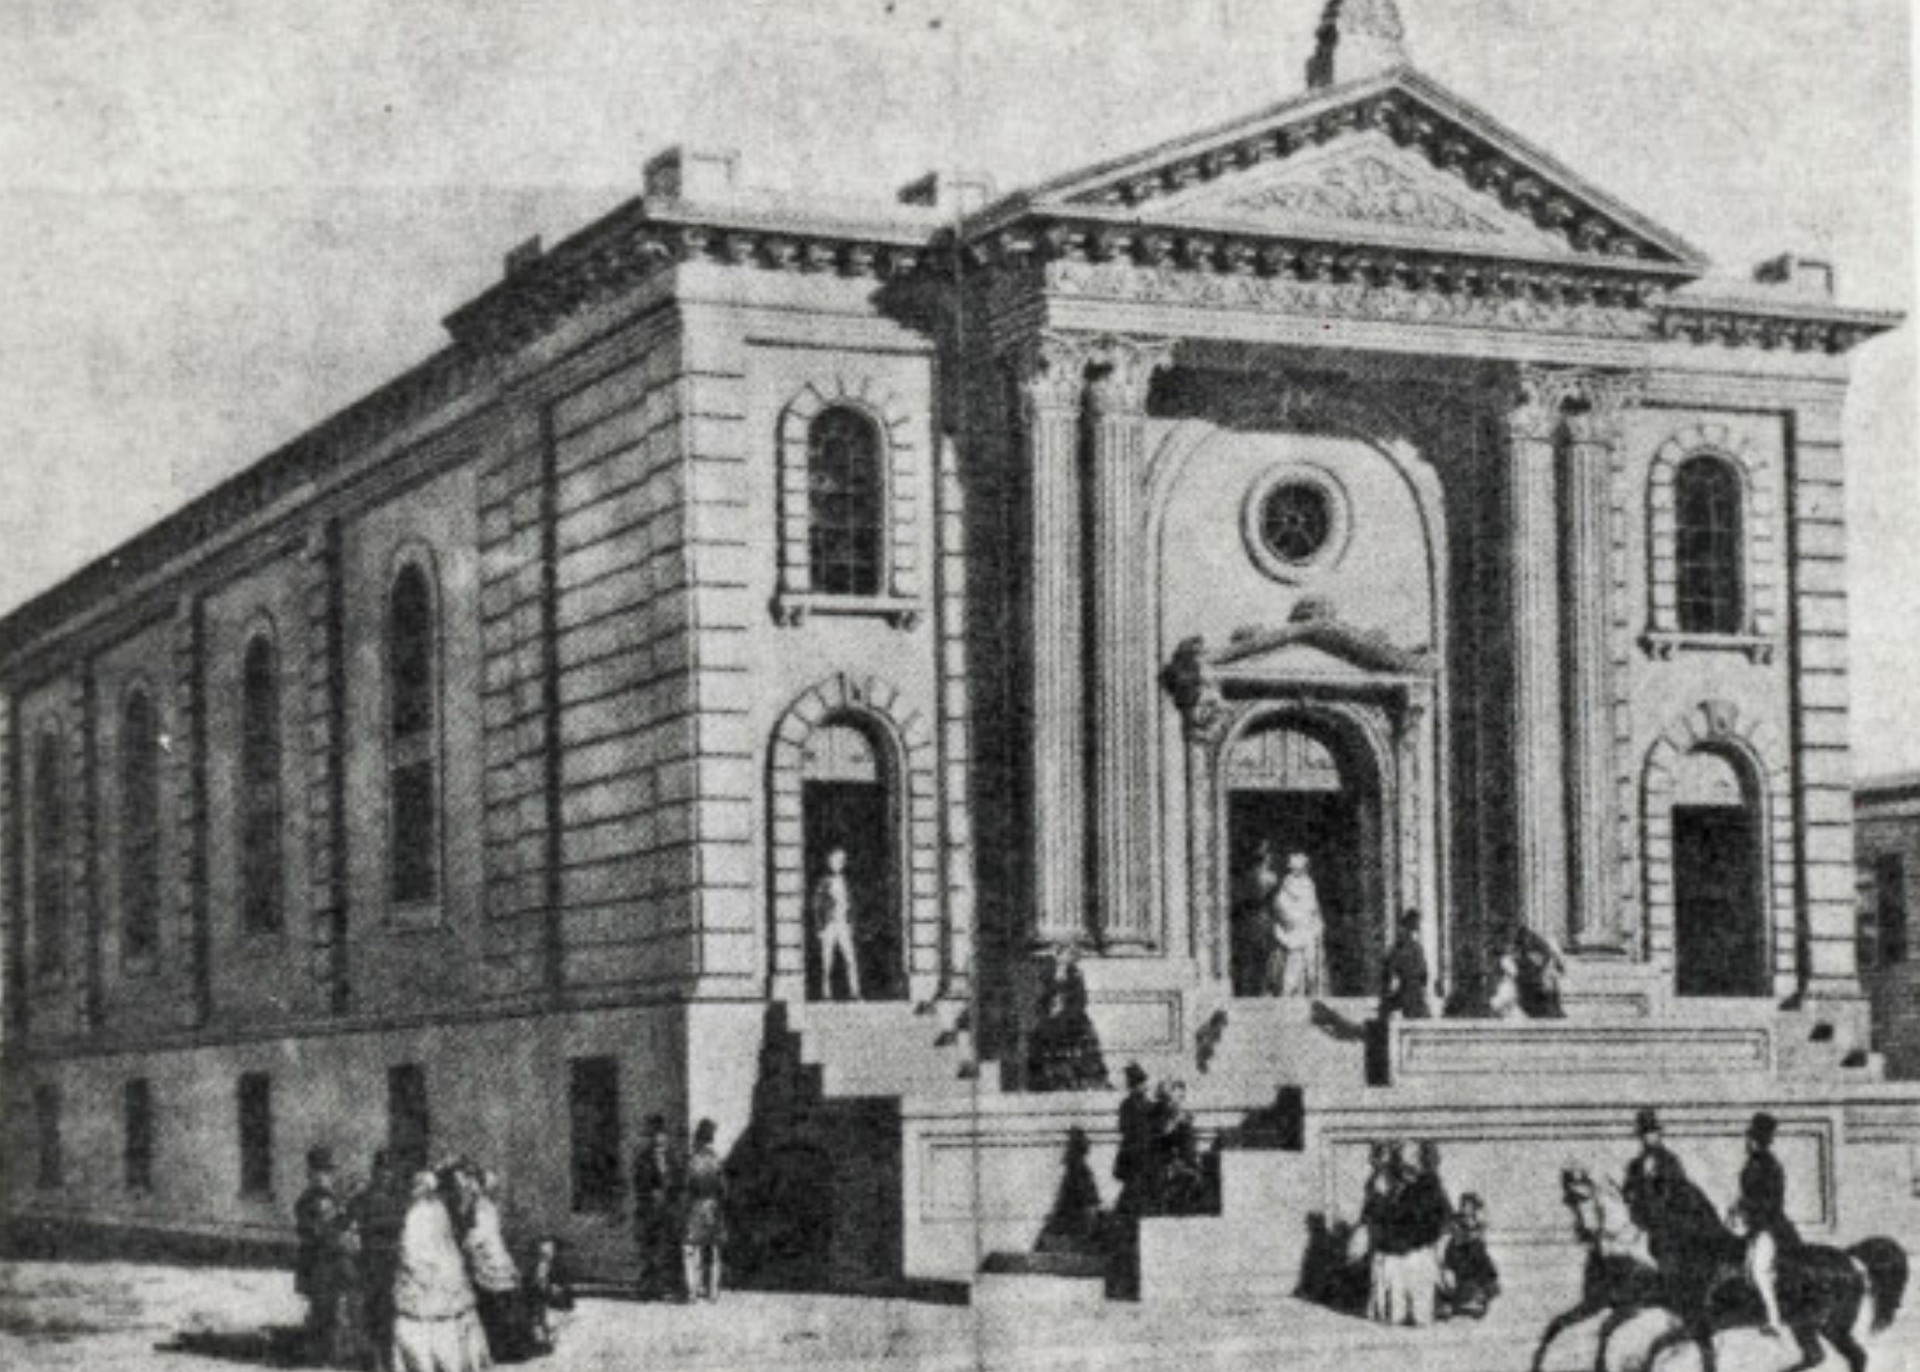 An Old, Historical Image of Calvary Building